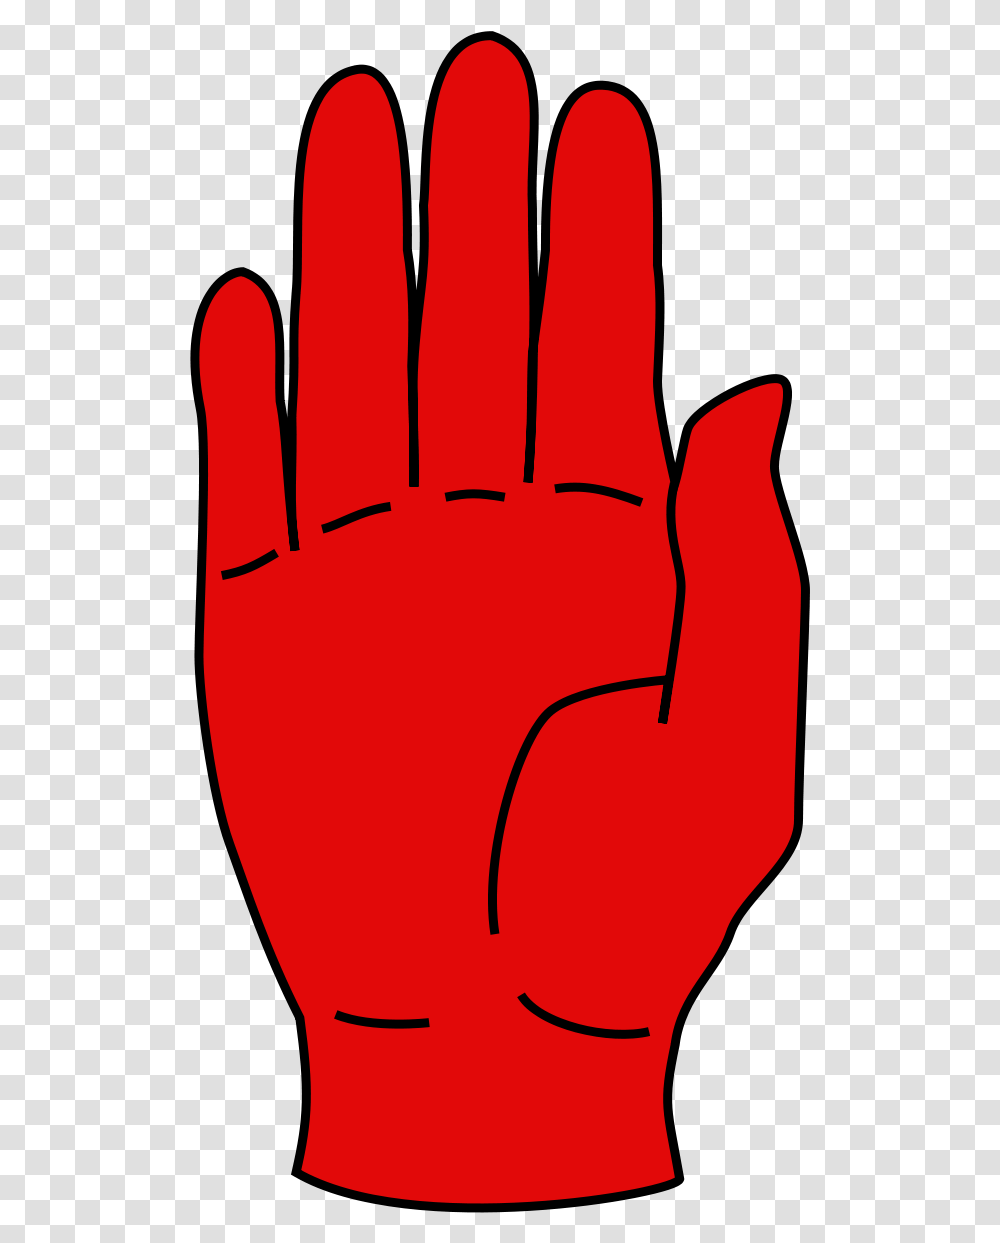 36th Ulster Division Wikipedia Red Hand Of Ulster, Fist, Plant, Weapon, Weaponry Transparent Png